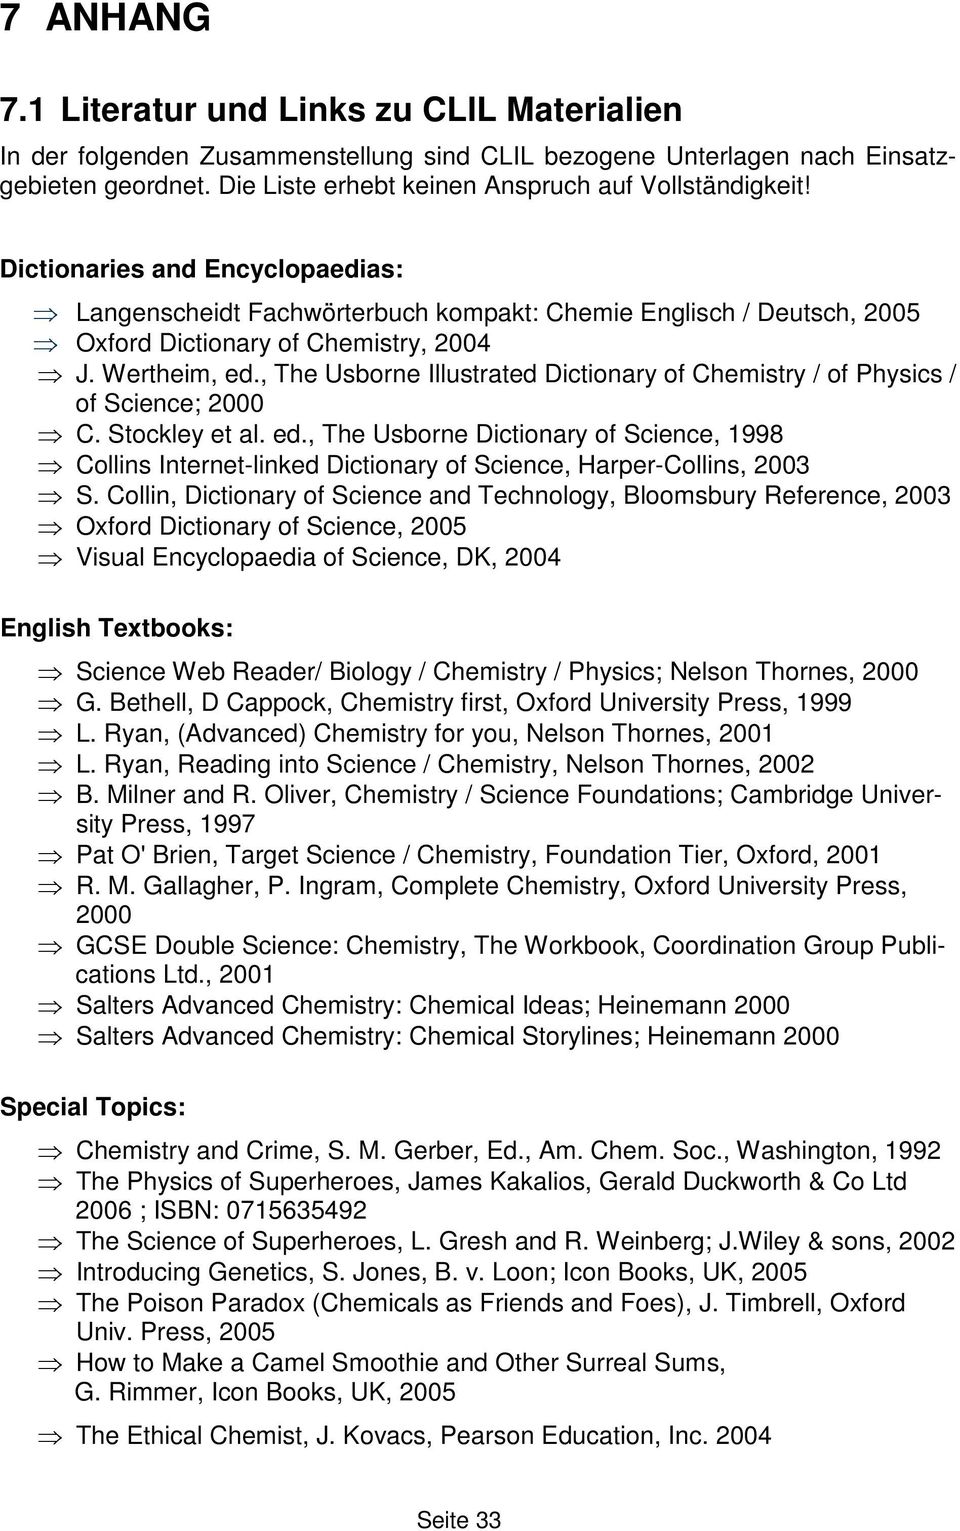 Wertheim, ed., The Usborne Illustrated Dictionary of Chemistry / of Physics / of Science; 2000 C. Stockley et al. ed., The Usborne Dictionary of Science, 1998 Collins Internet-linked Dictionary of Science, Harper-Collins, 2003 S.